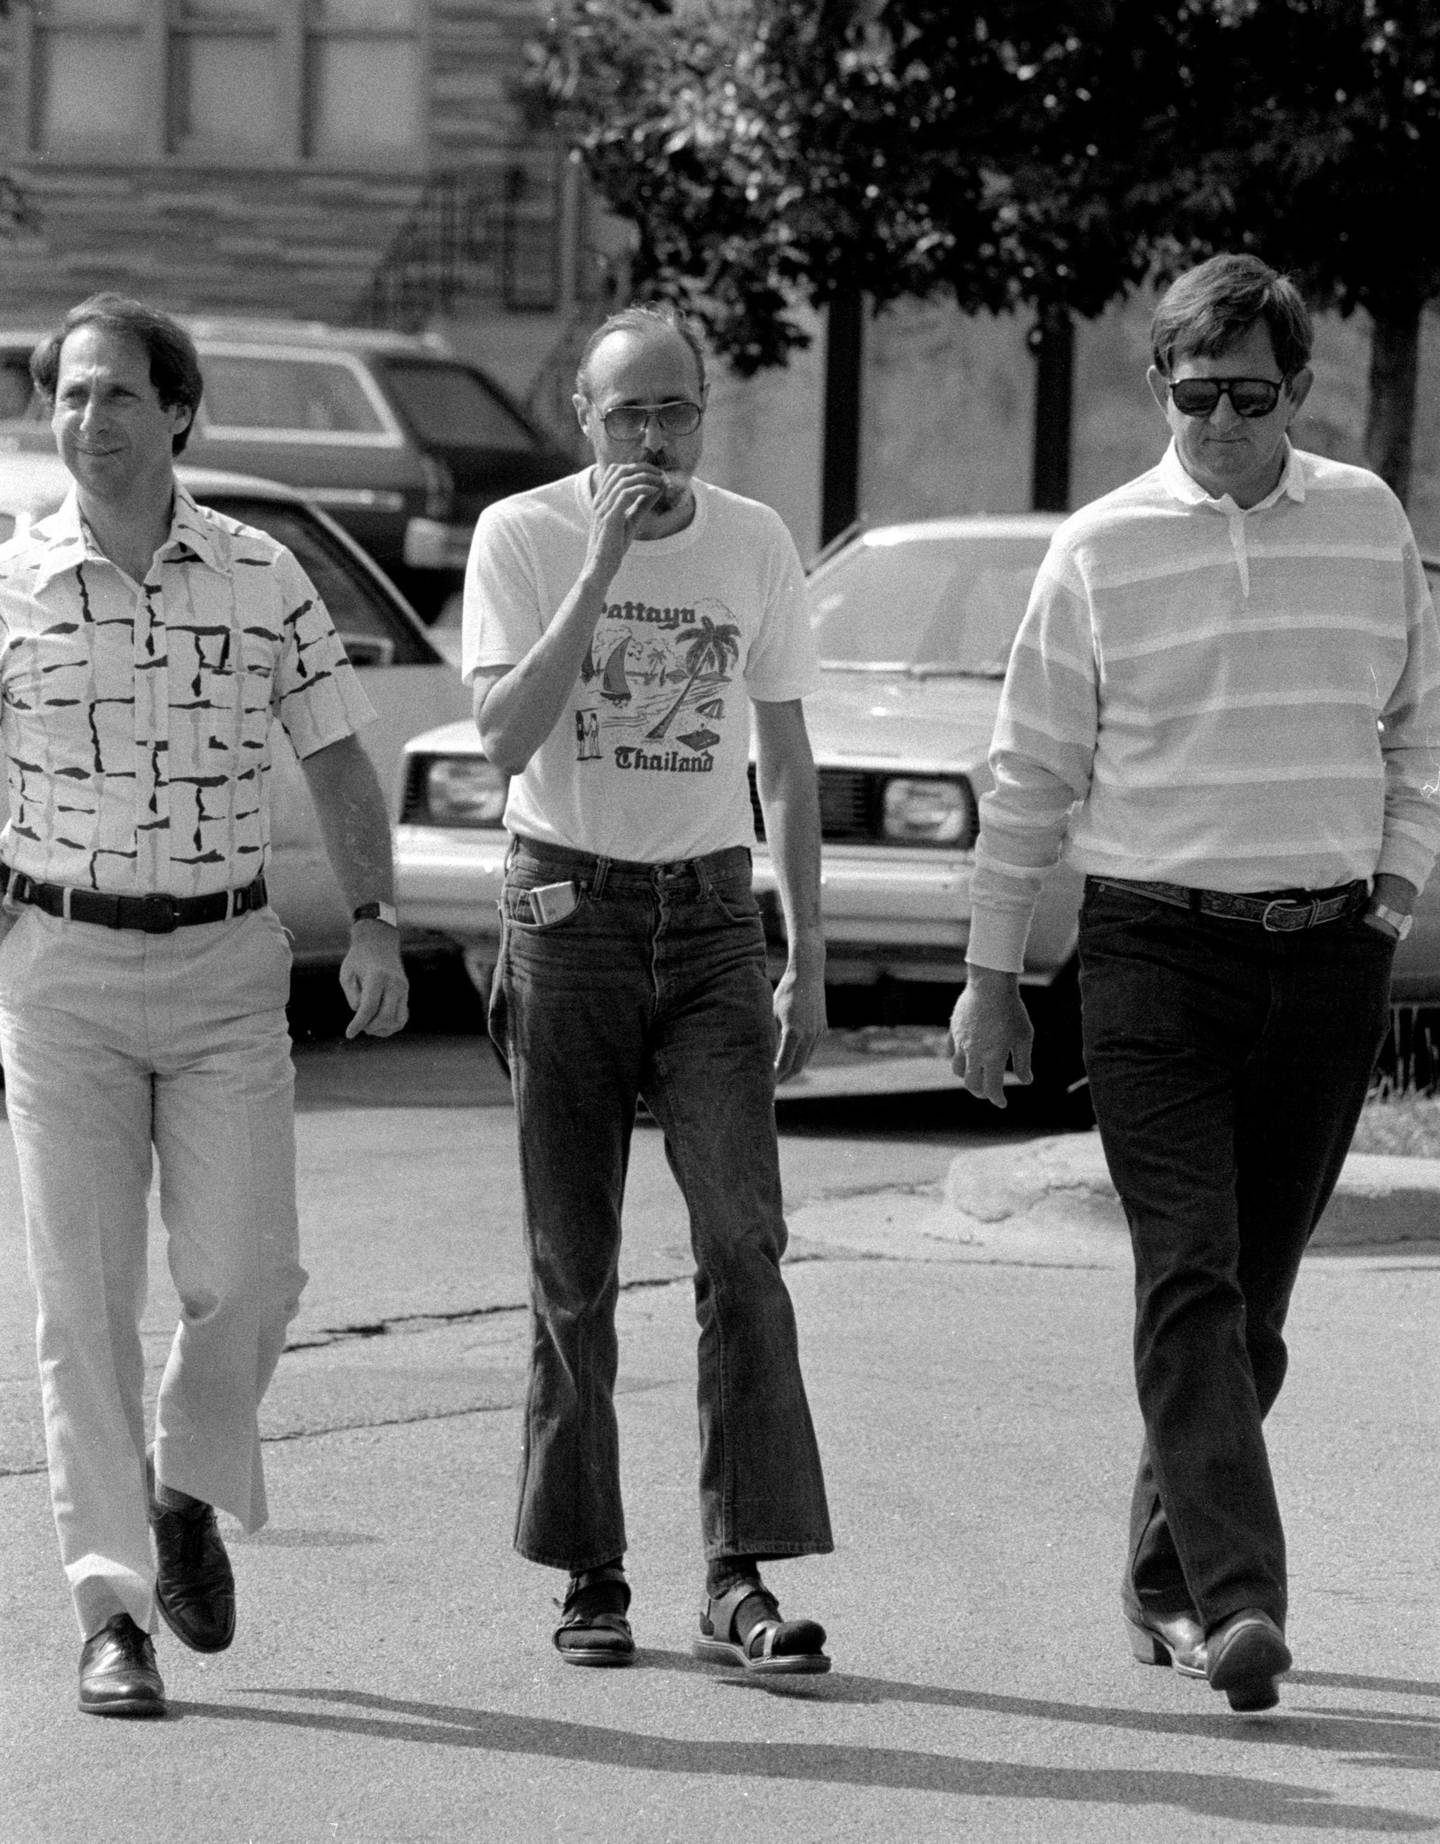 Roger Arnold, center, surrenders to police in connection with the fatal shooting of John Stanisha in 1983. Arnold, who was convicted, remained haunted by the murder for years, friends said.